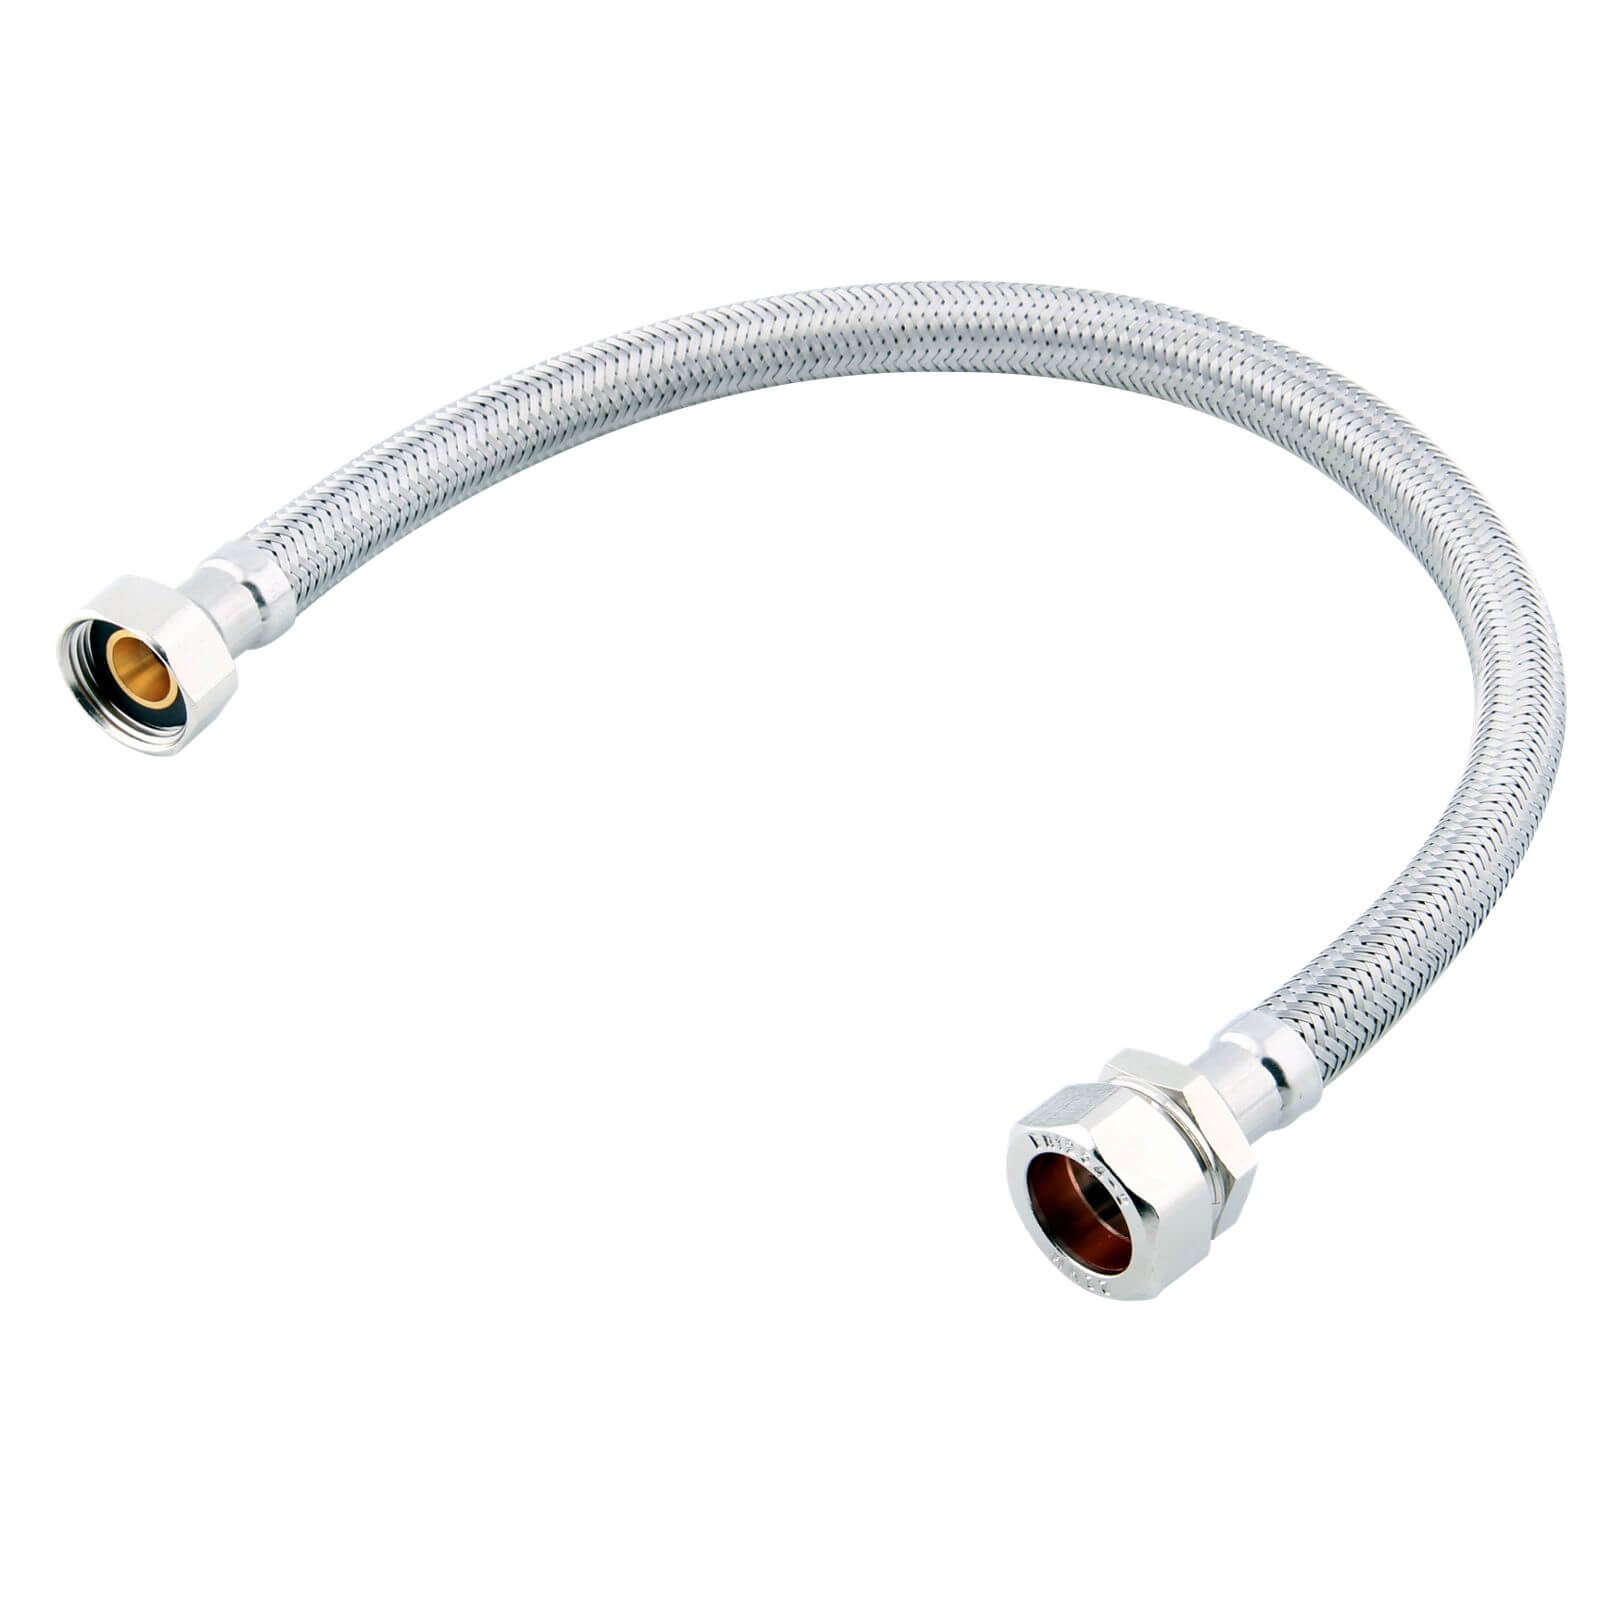 Kinetic Flexible Tap Connector - 22mm x 3/4in x 500mm - WRAS Approved